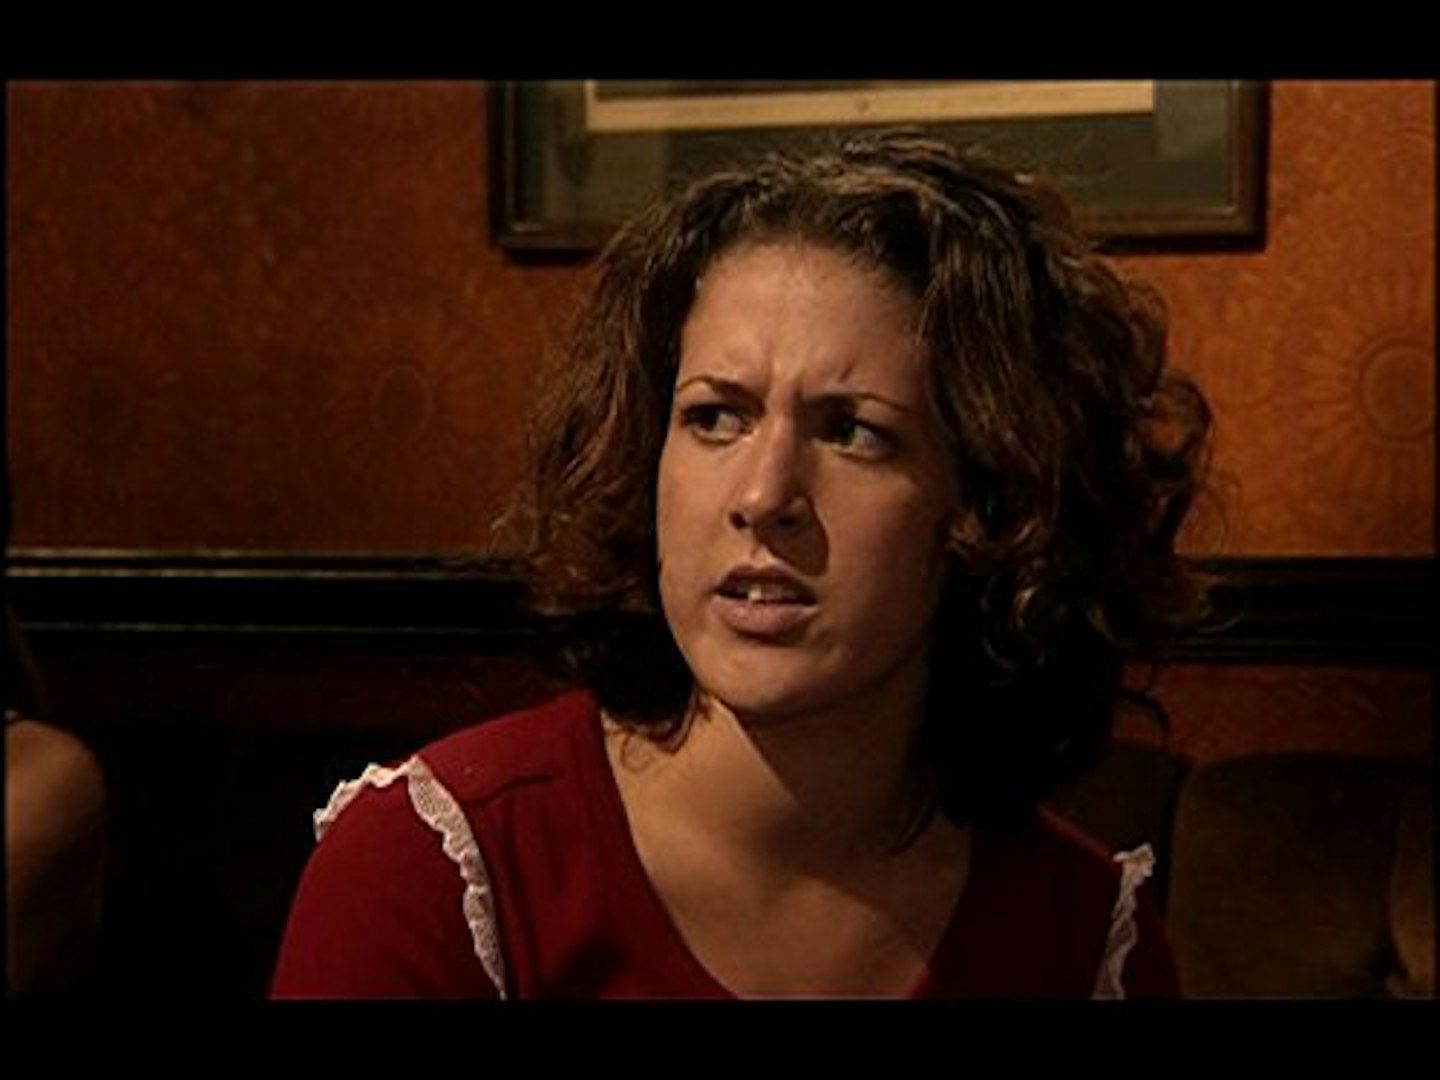 Donna Henshaw played by Natalie Casey